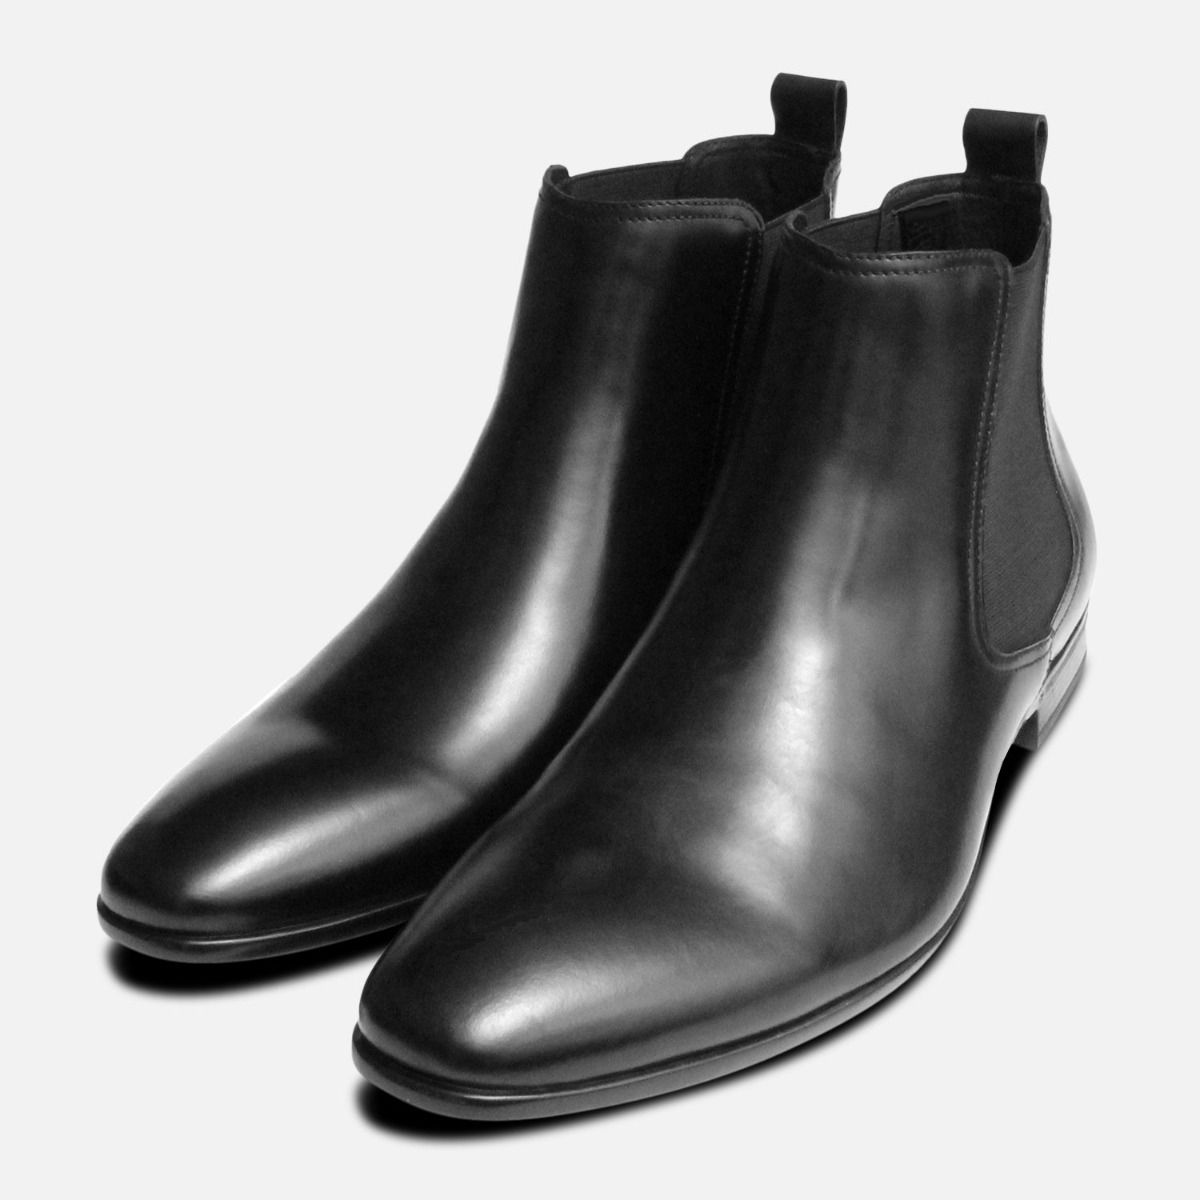 Formal Black John White Chelsea Boot with Rubber Sole